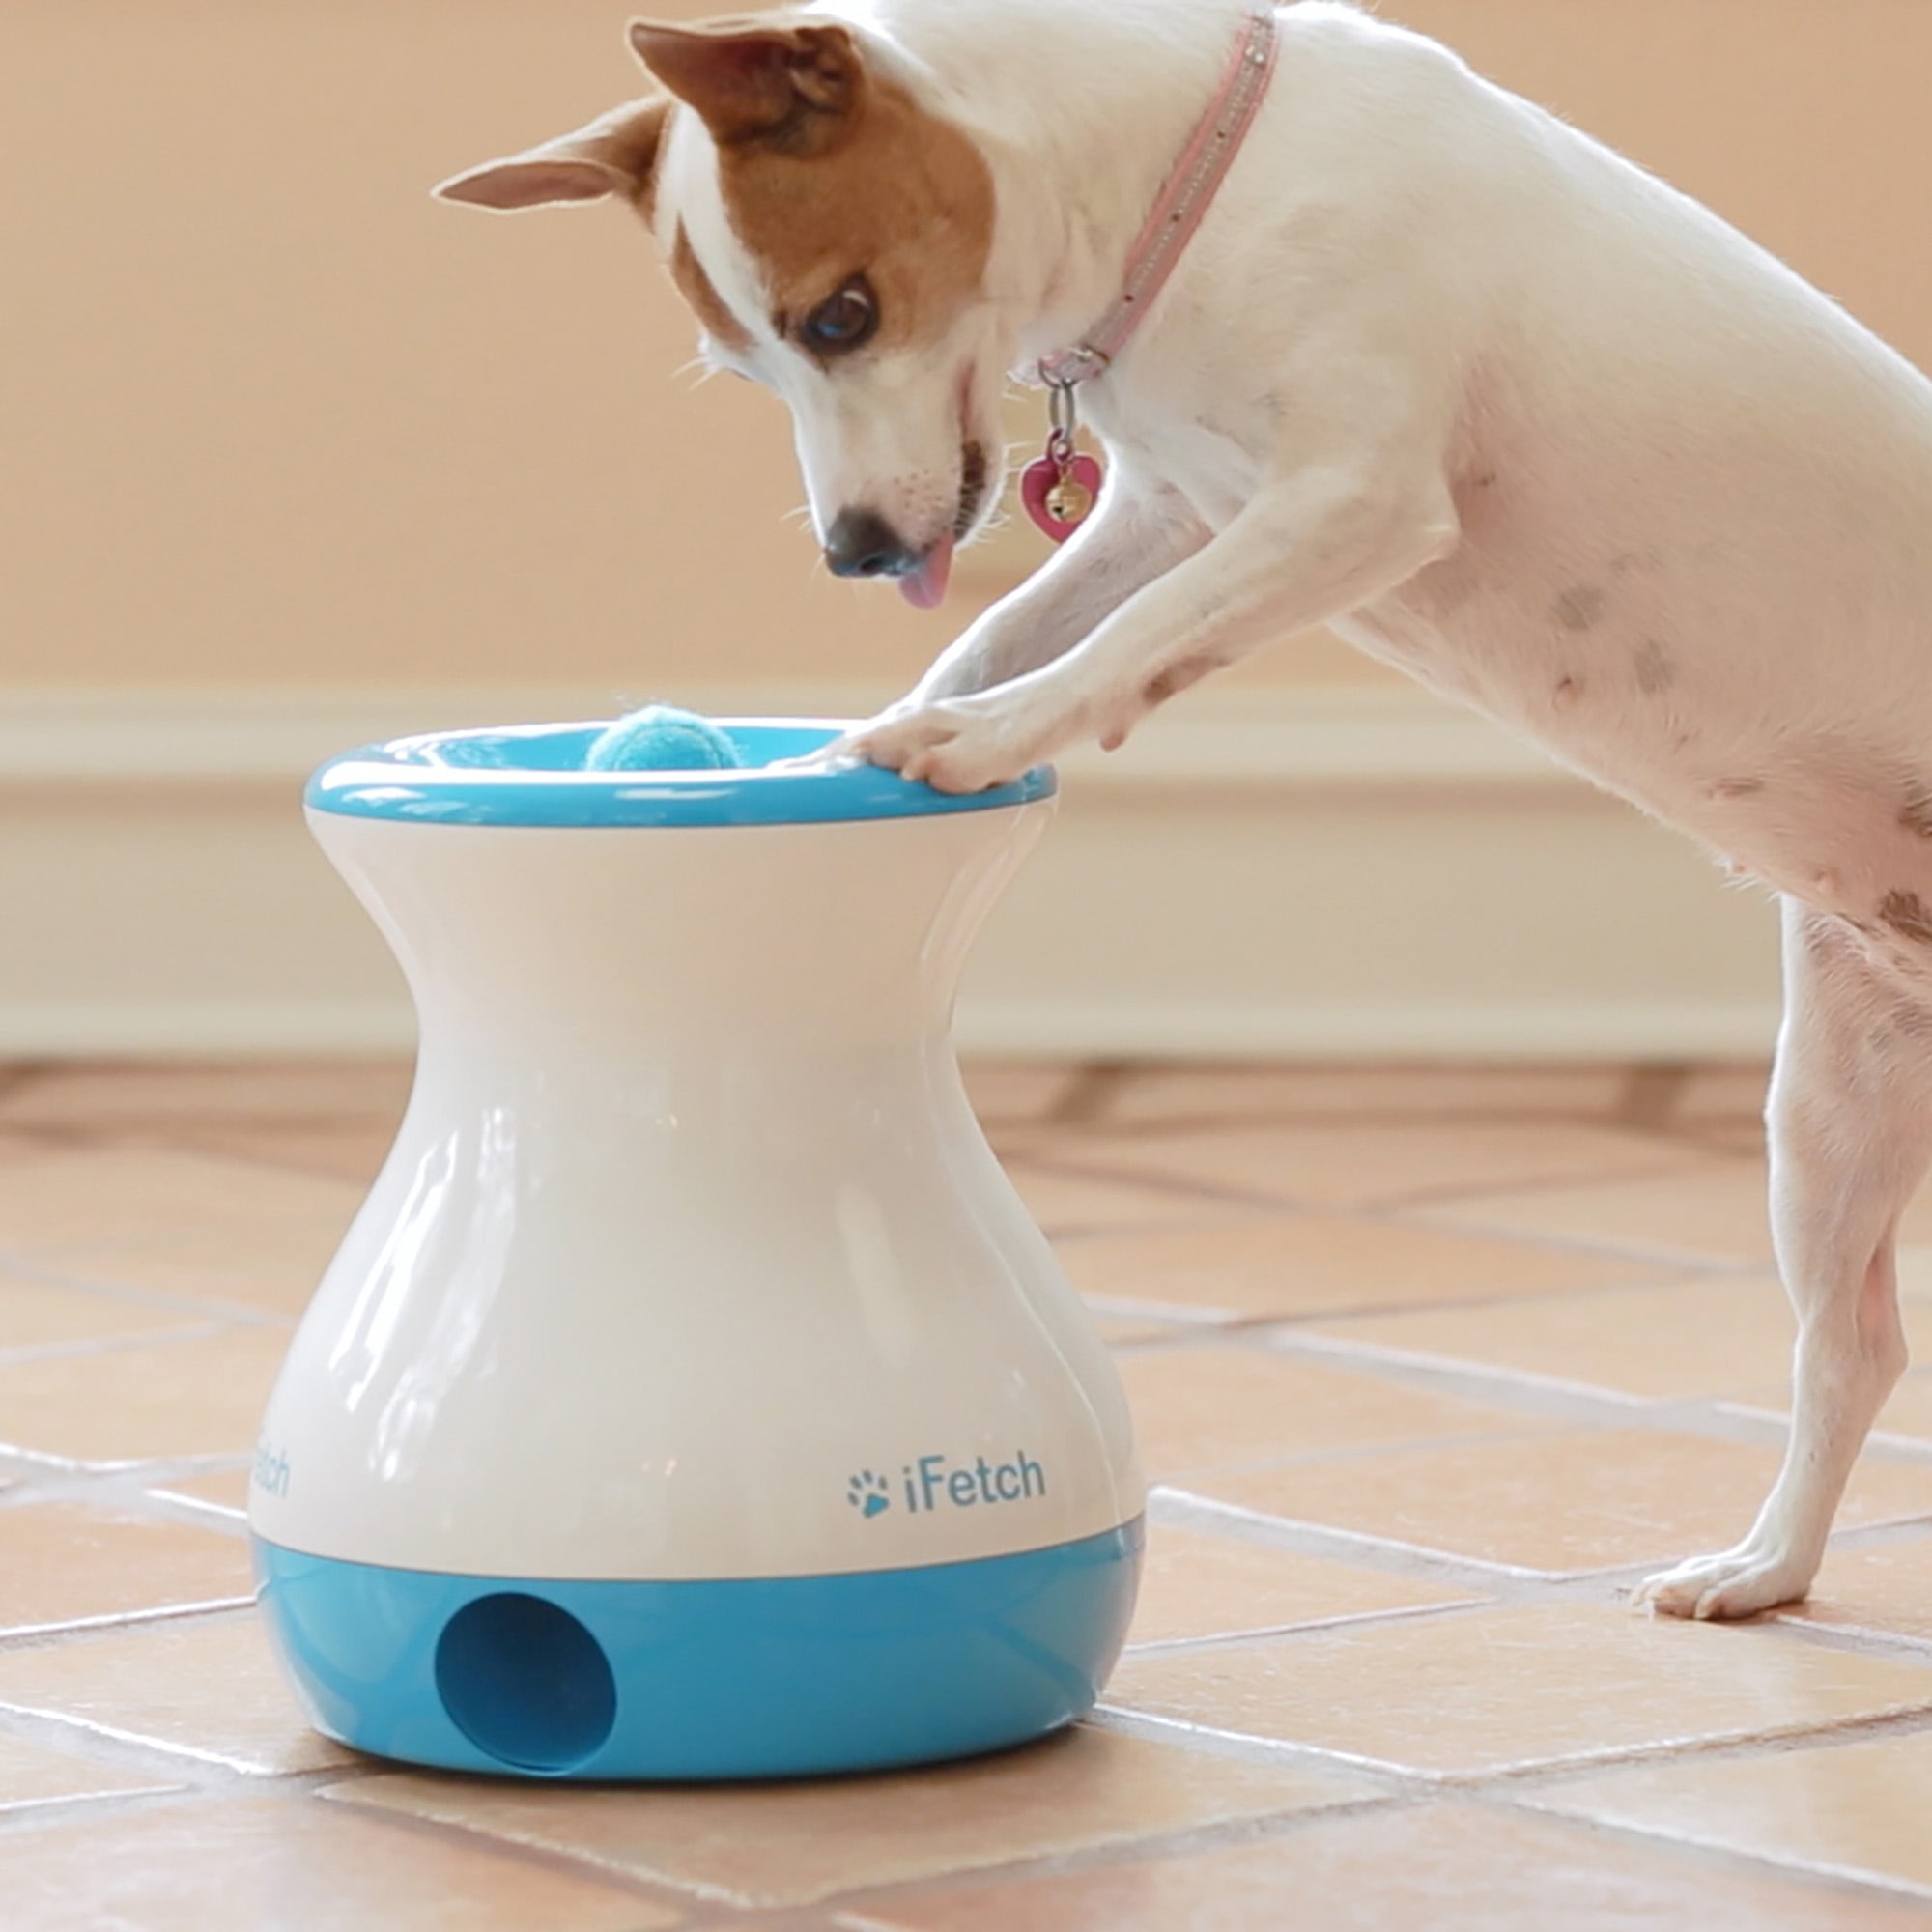 Interactive Dog Toys For Your Dog | Petco